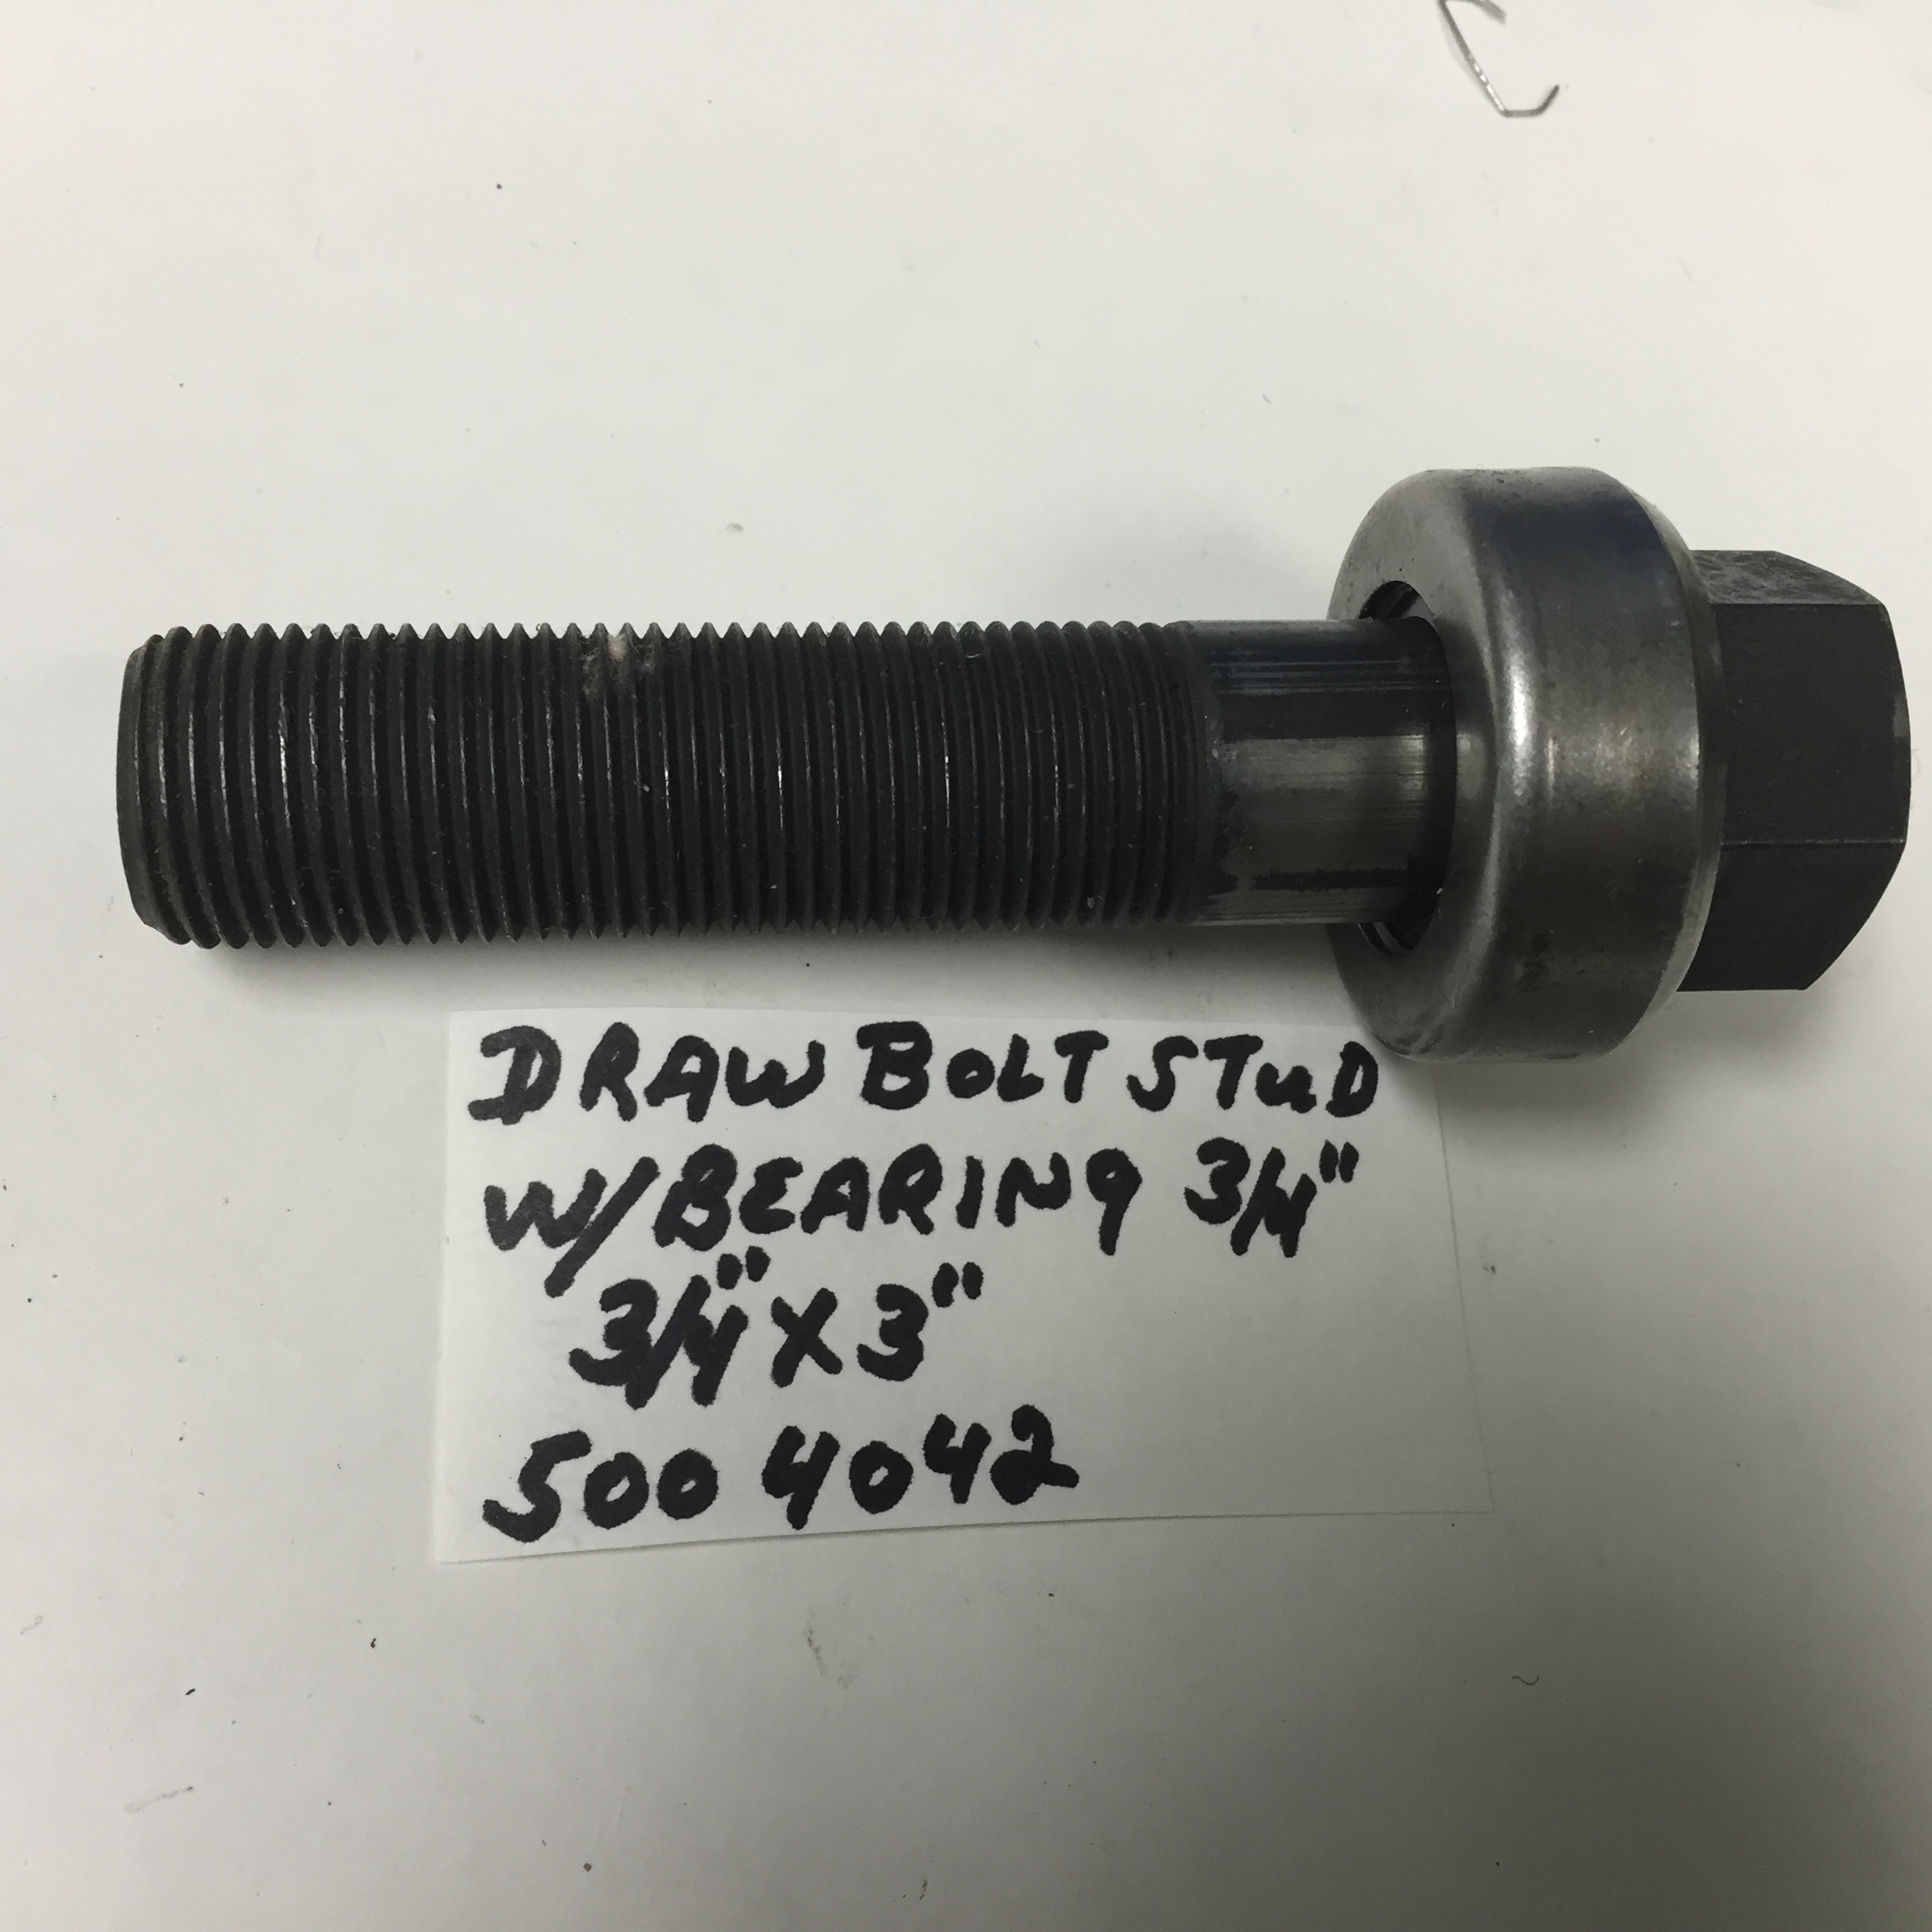 GREENLEE 3/4" DRIVE SCREW WITH BALL BEARING 500 4040 